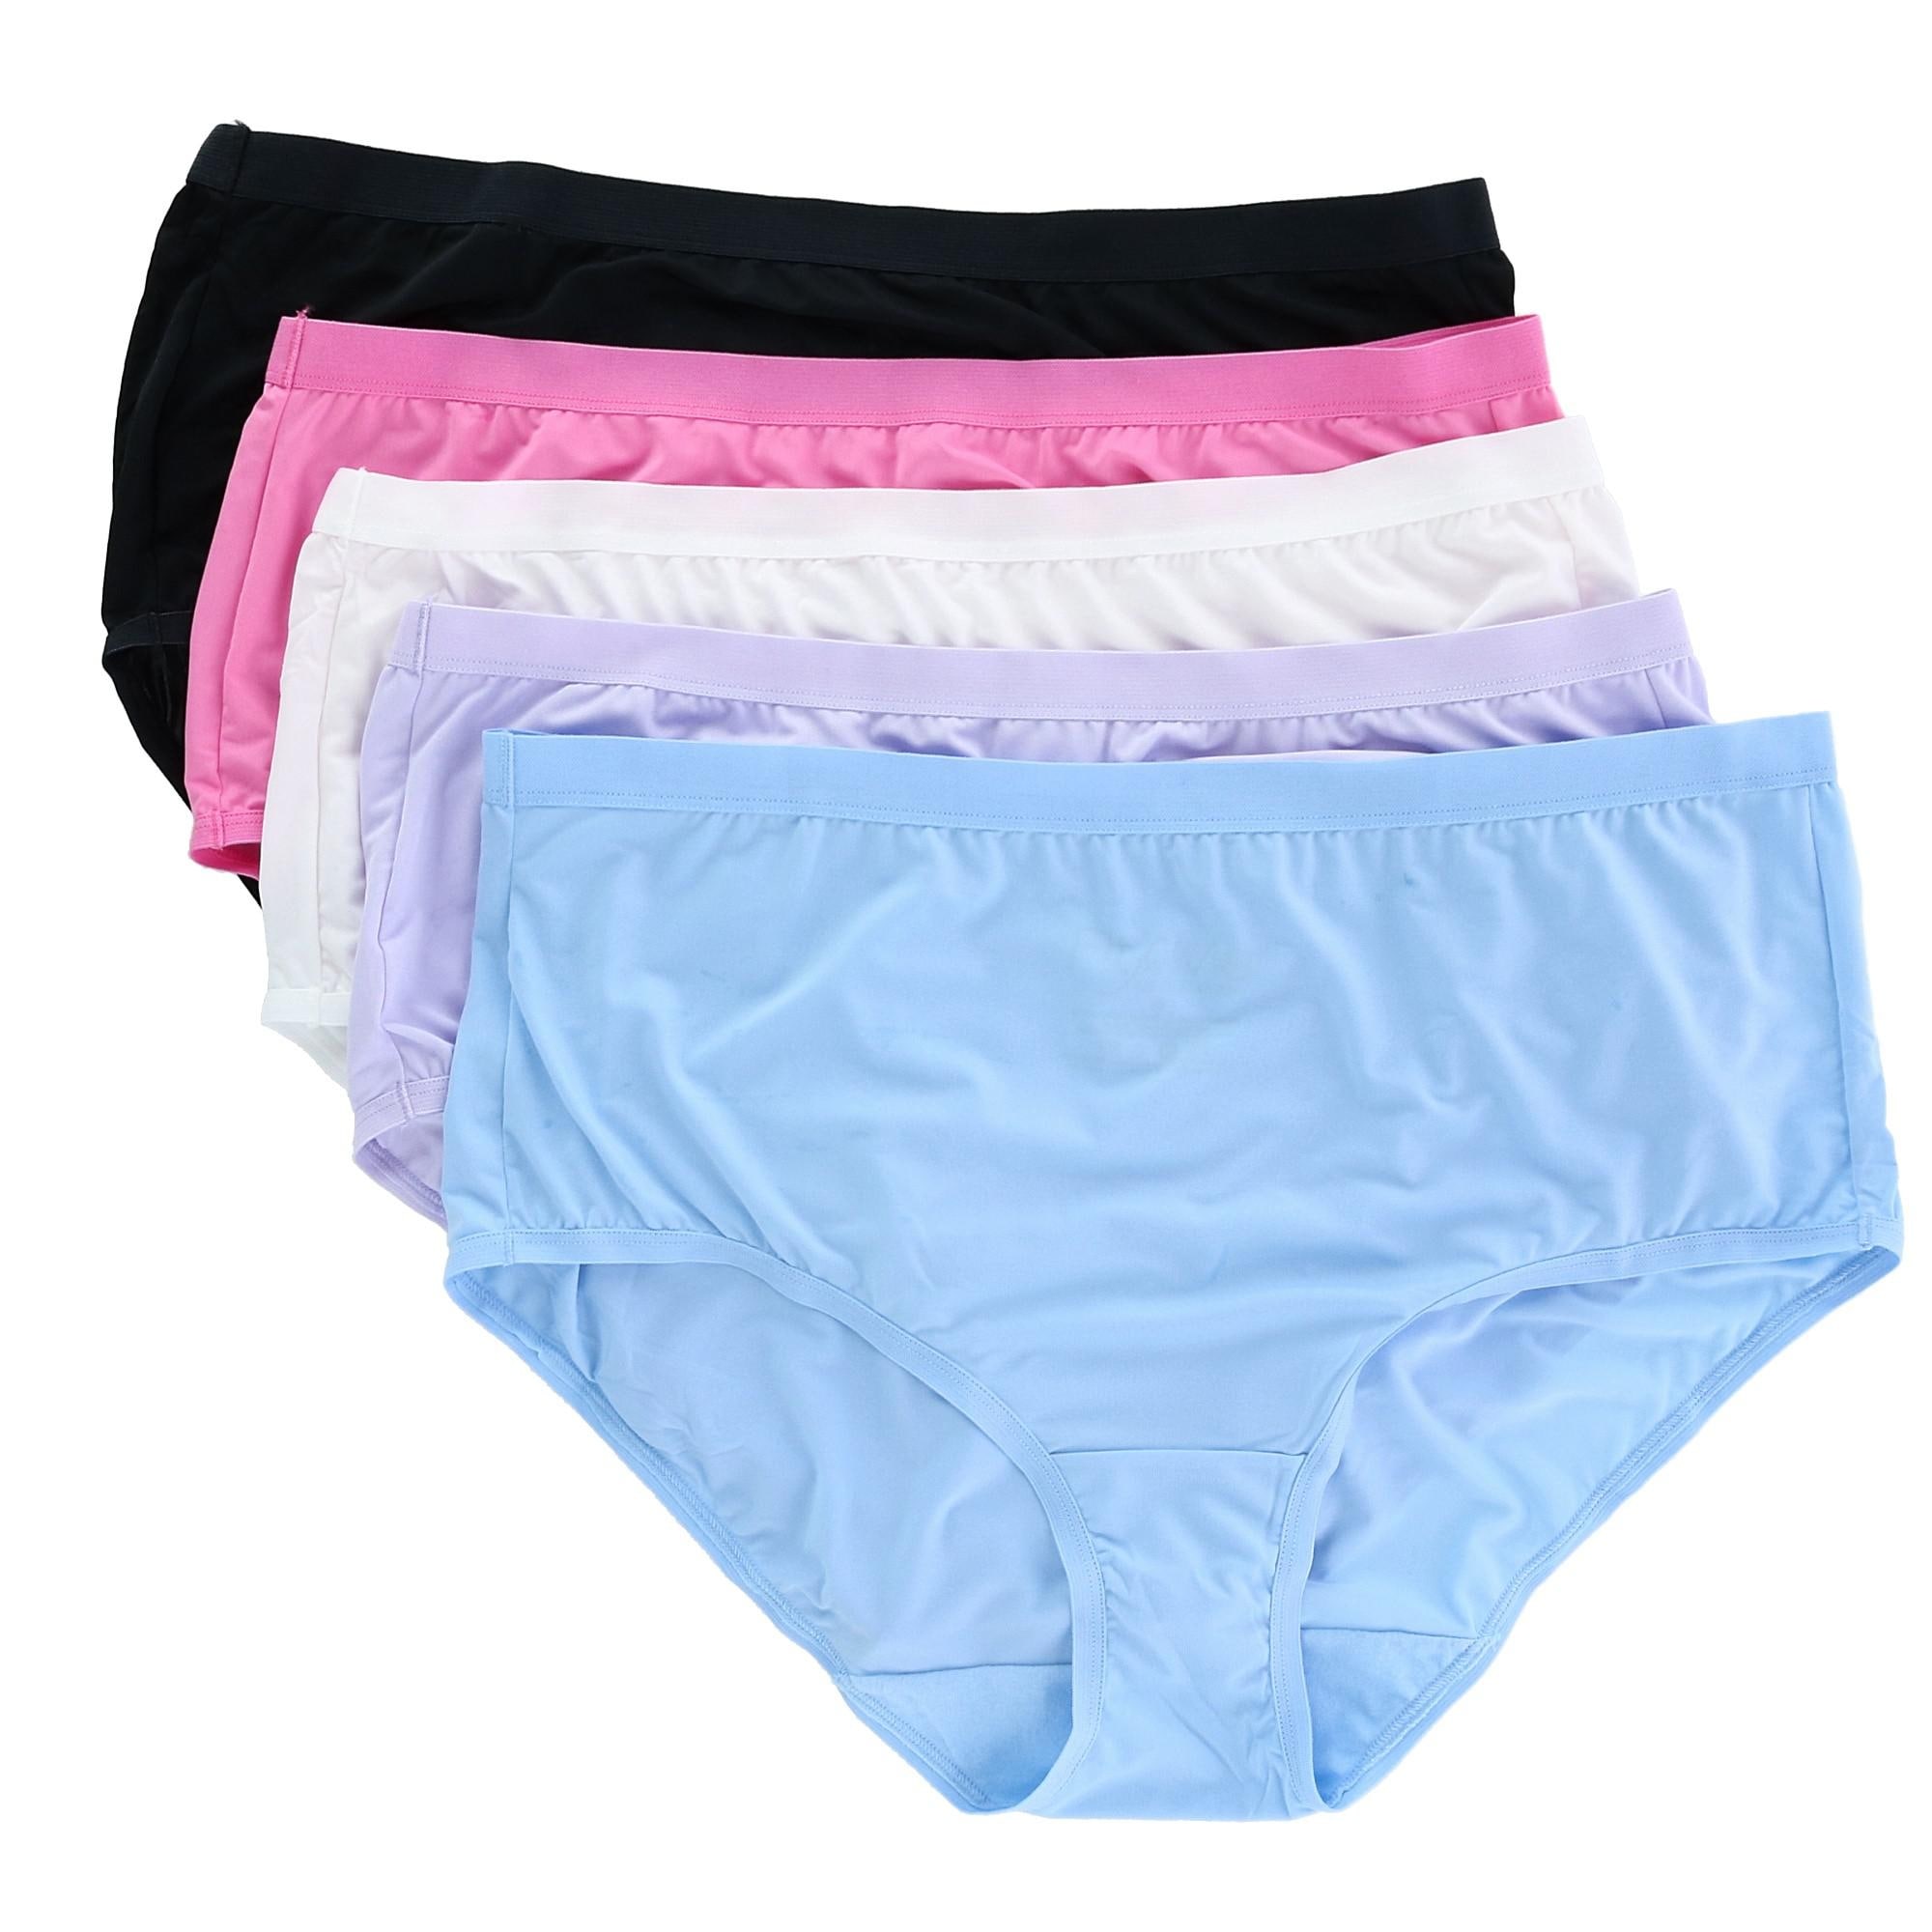 Details about  / Fruit of The Loom Women/'s Microfiber Underwear Multipack Assorted